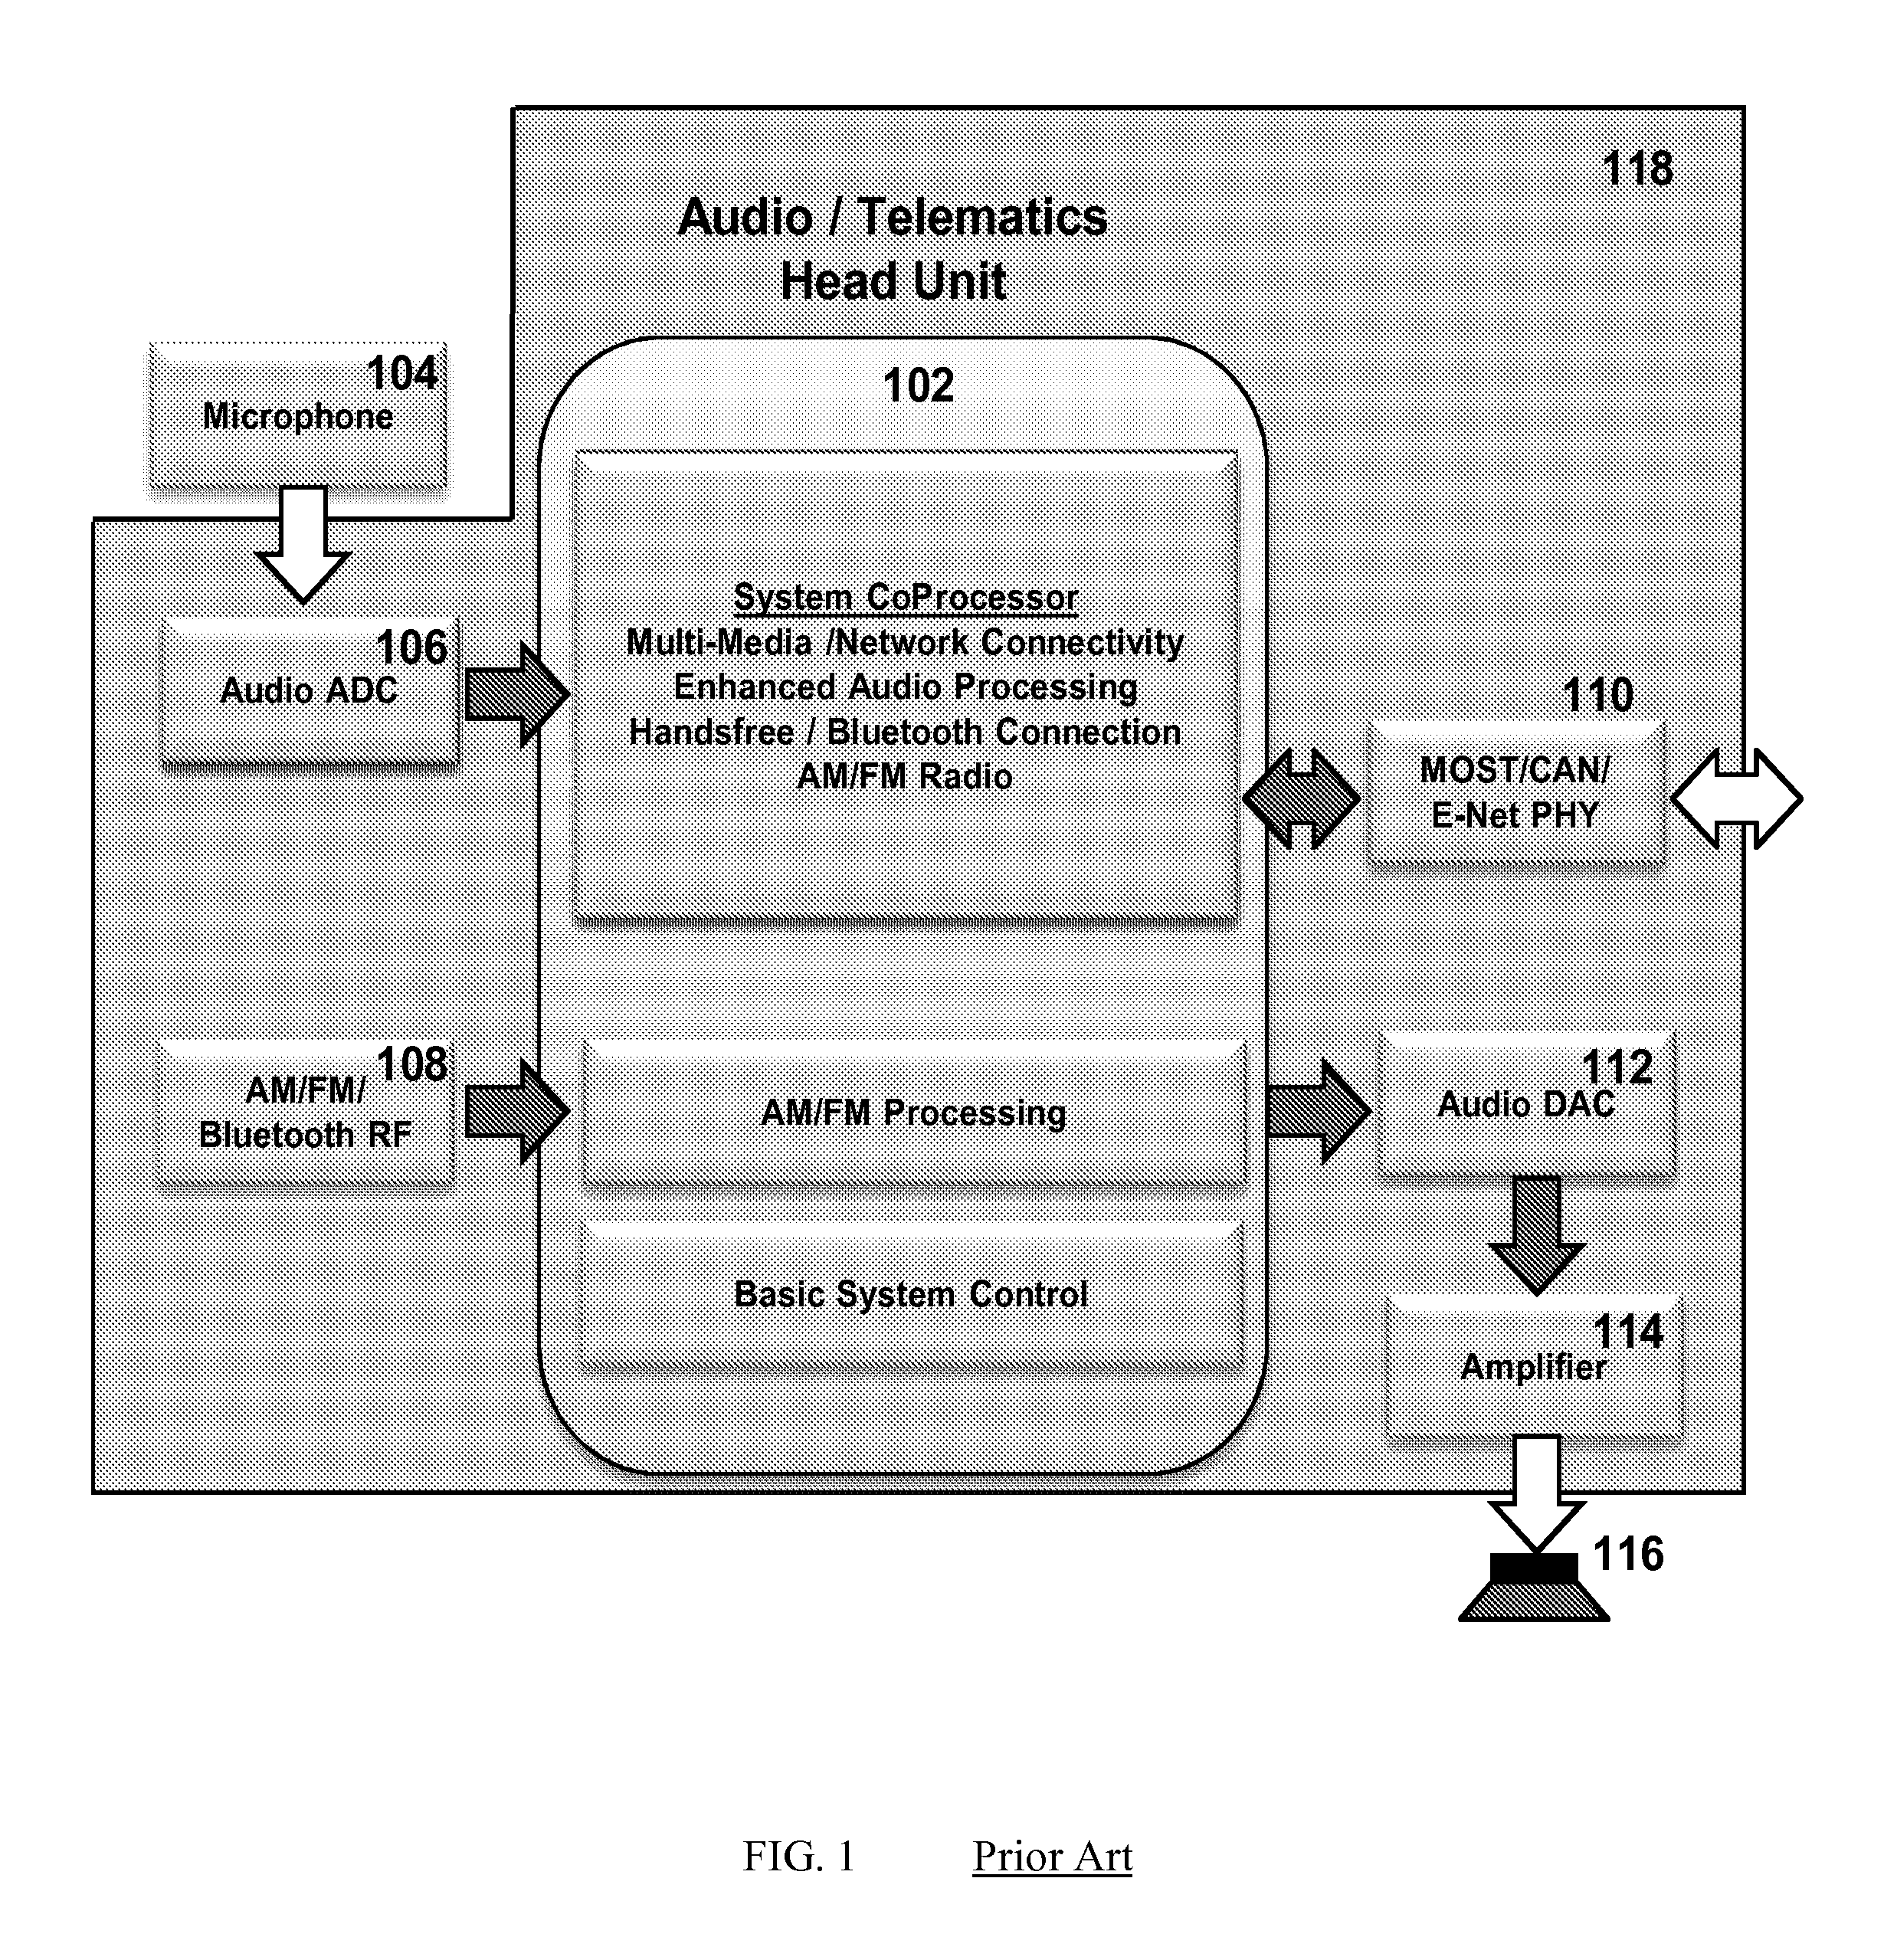 Methods for Discovery, Configuration, and Coordinating Data Communications Between Master and Slave Devices in a Communication System